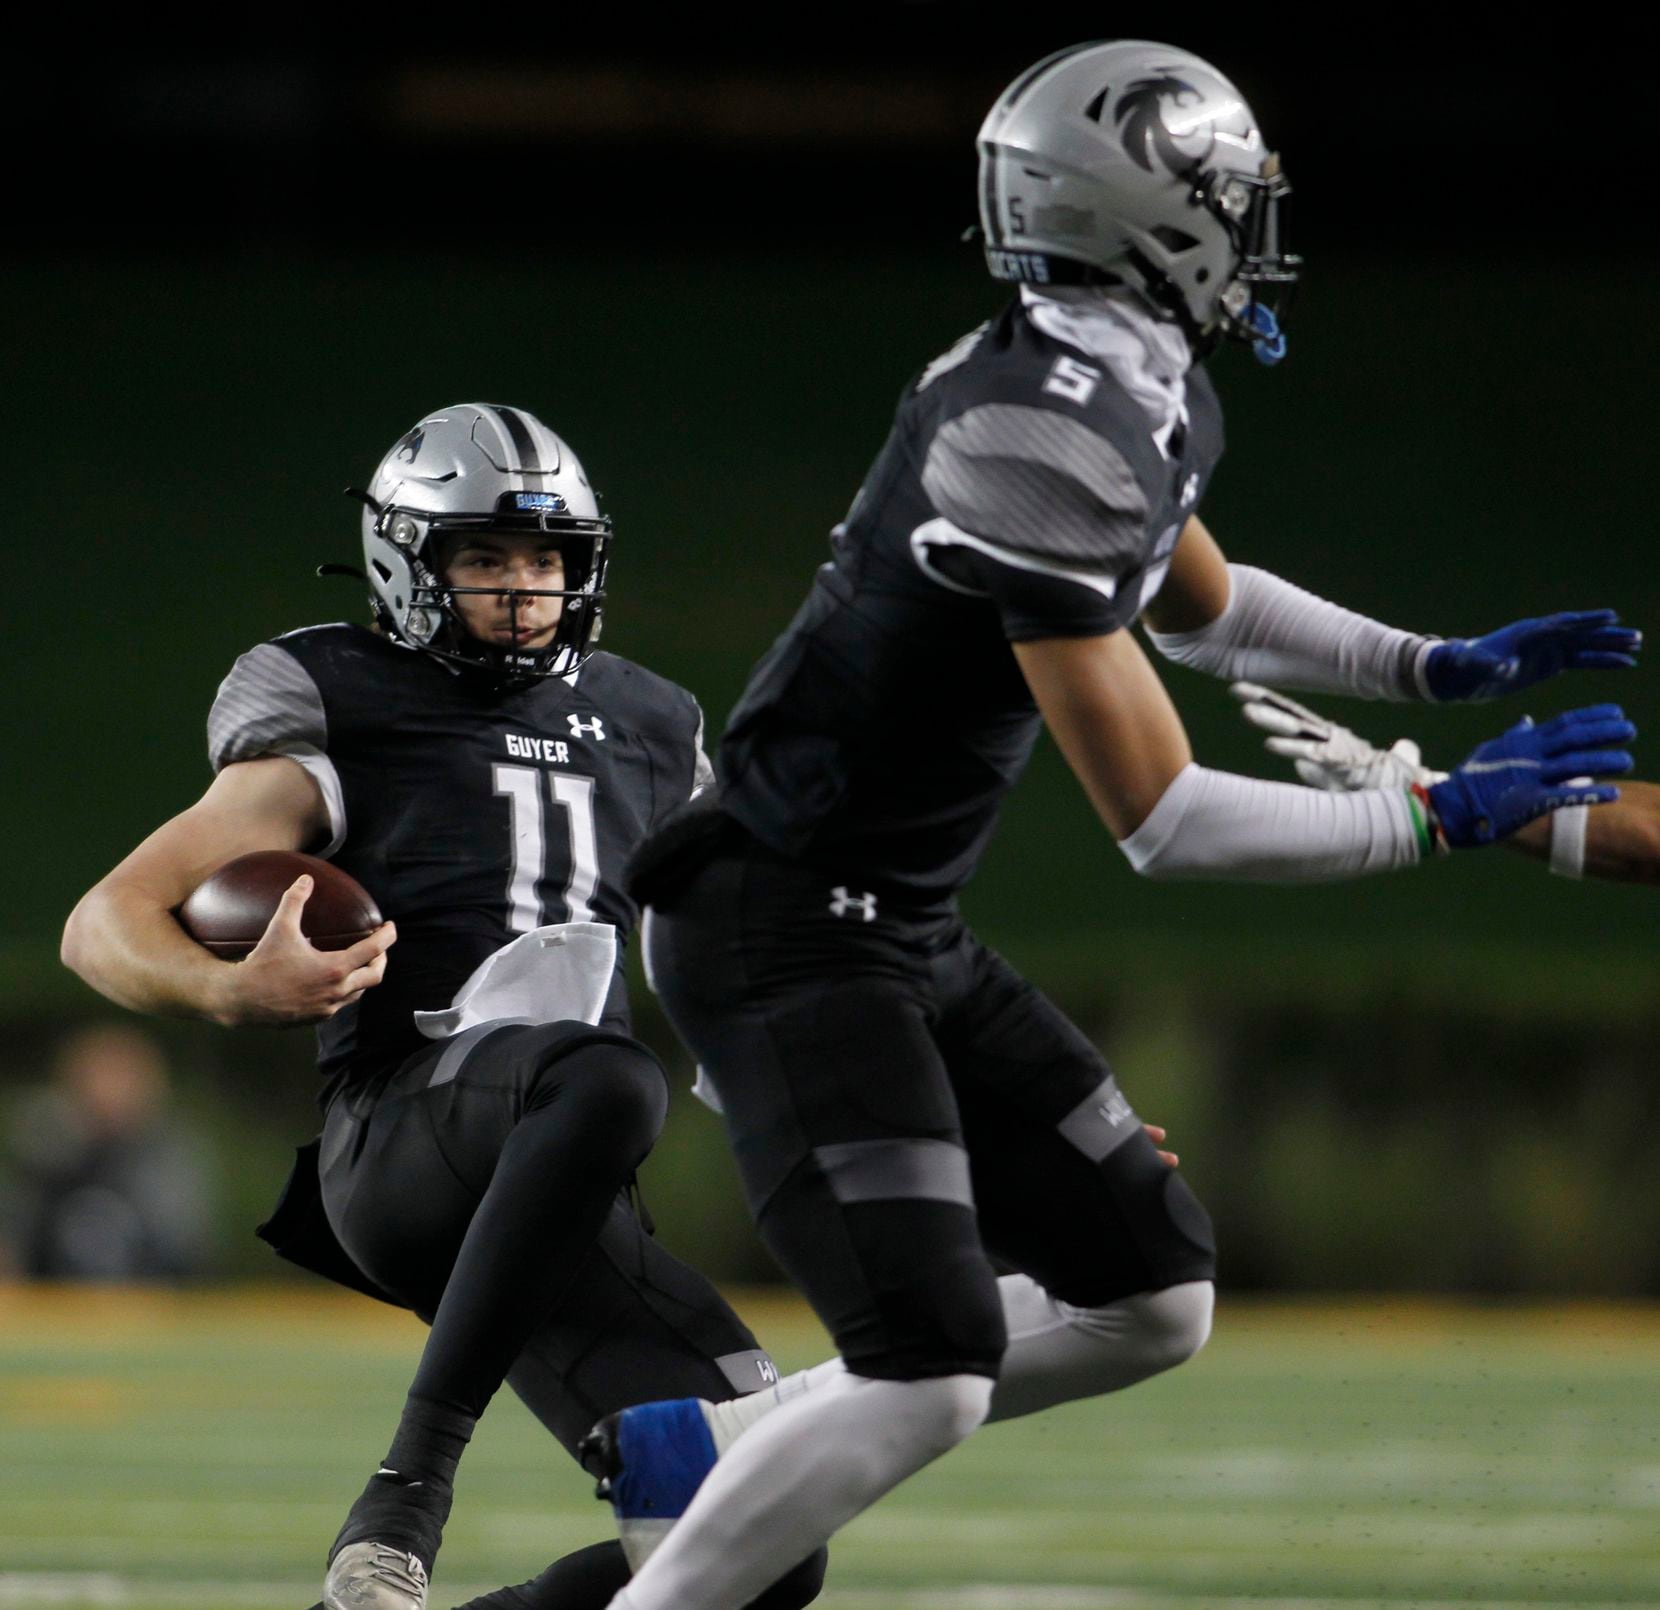 Denton Guyer quarterback Jackson Arnold (11) slides to avoid contact during a first quarter...